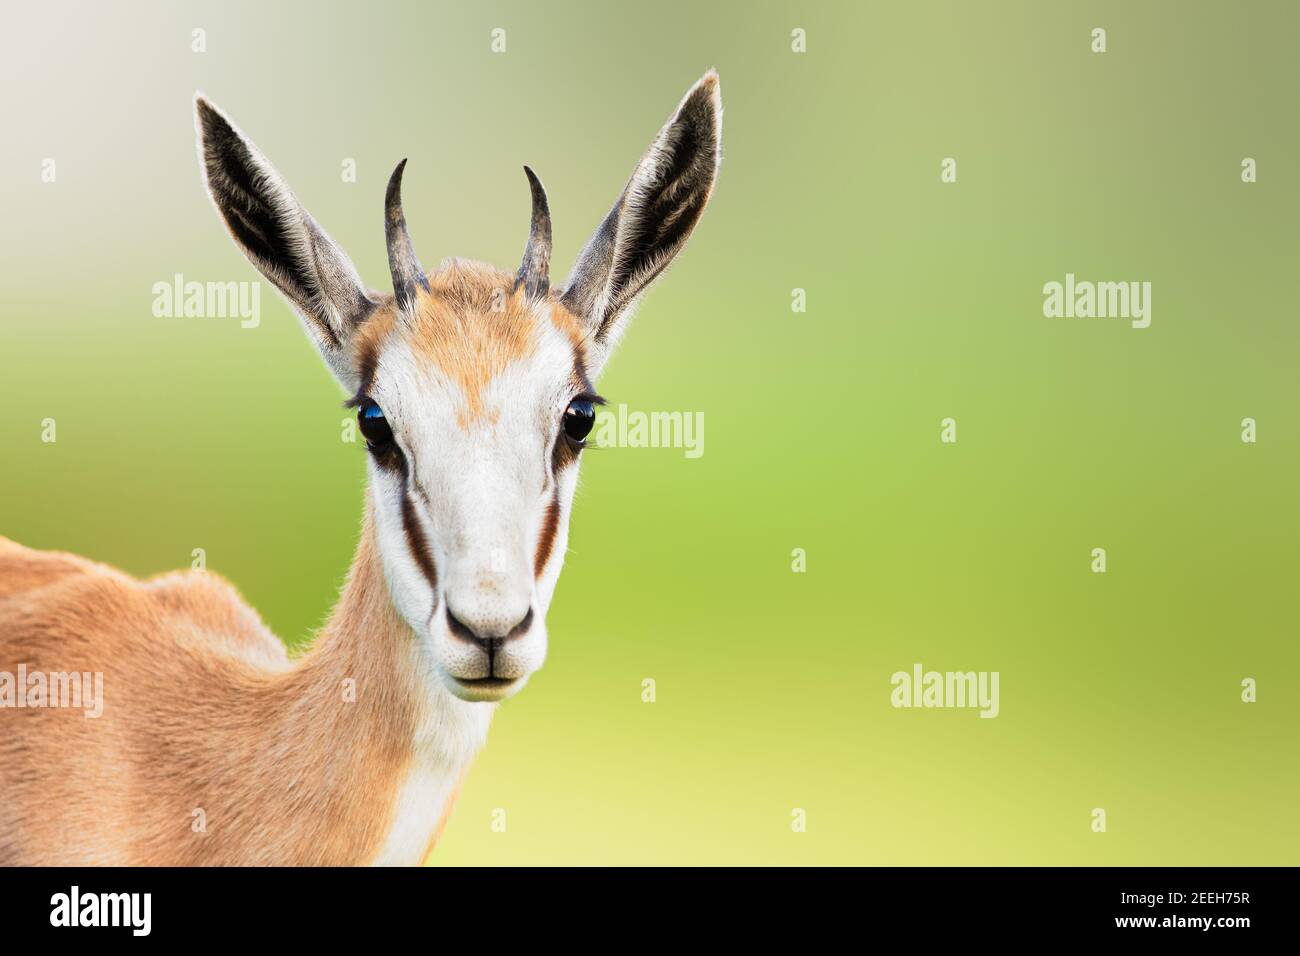 Springbuck or Springbok sub-adult close-up facial portrait with a sweet loving expression and copy space. Stock Stock Photo